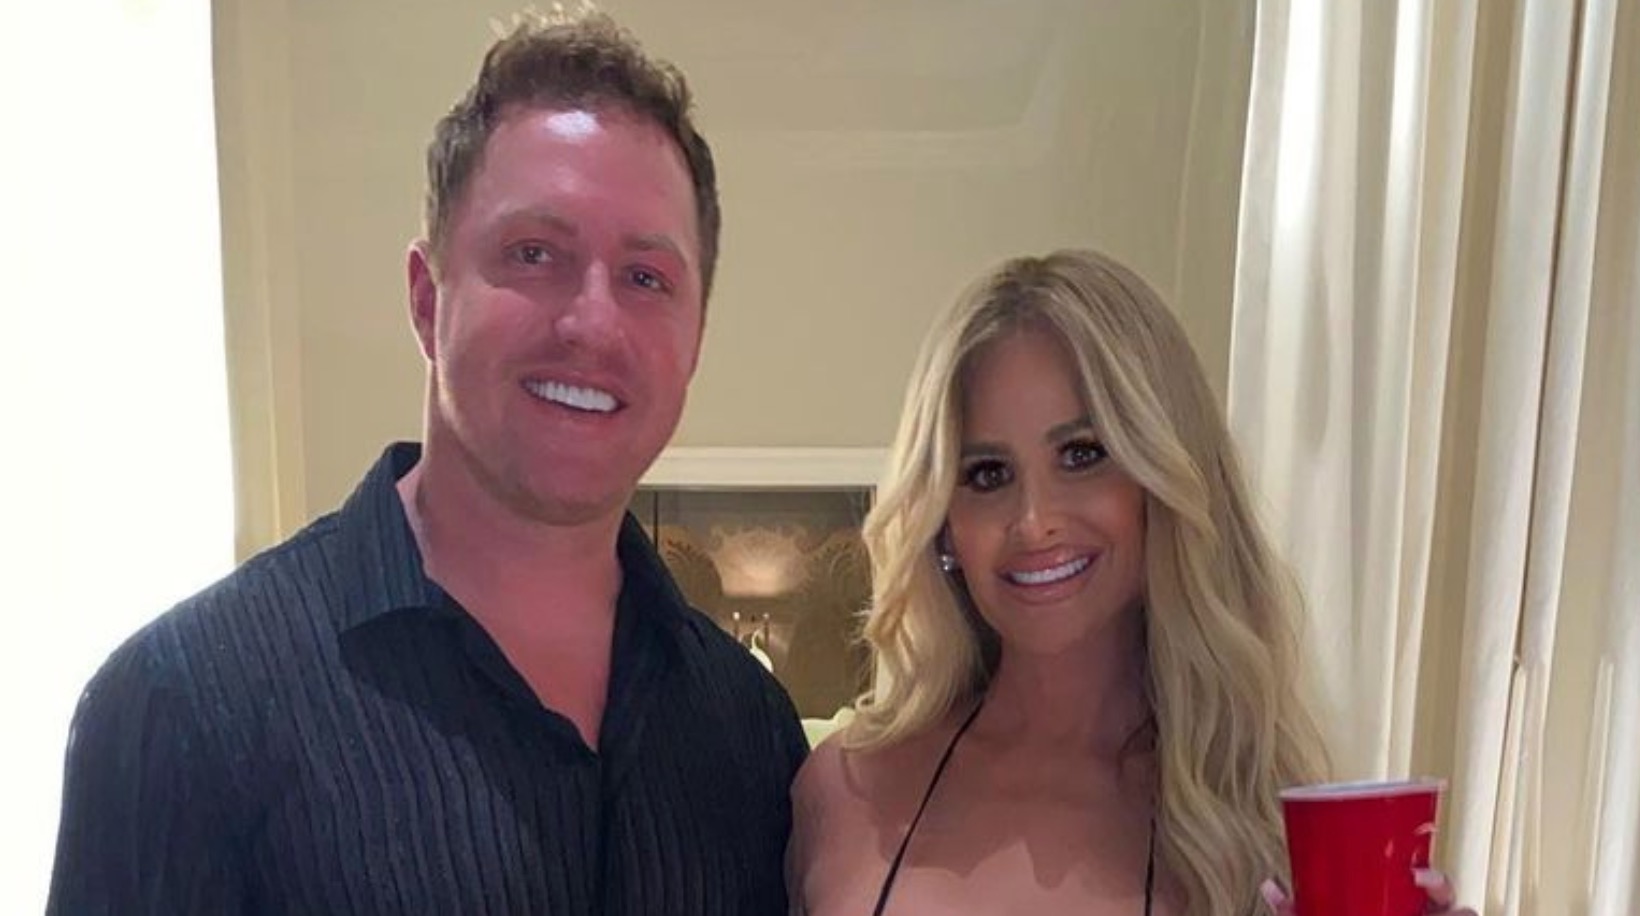 Police Called to Reality Stars' Home Following Domestic Dispute | Things are getting bad for the Biermann family as cops are called to the reality stars’ home.